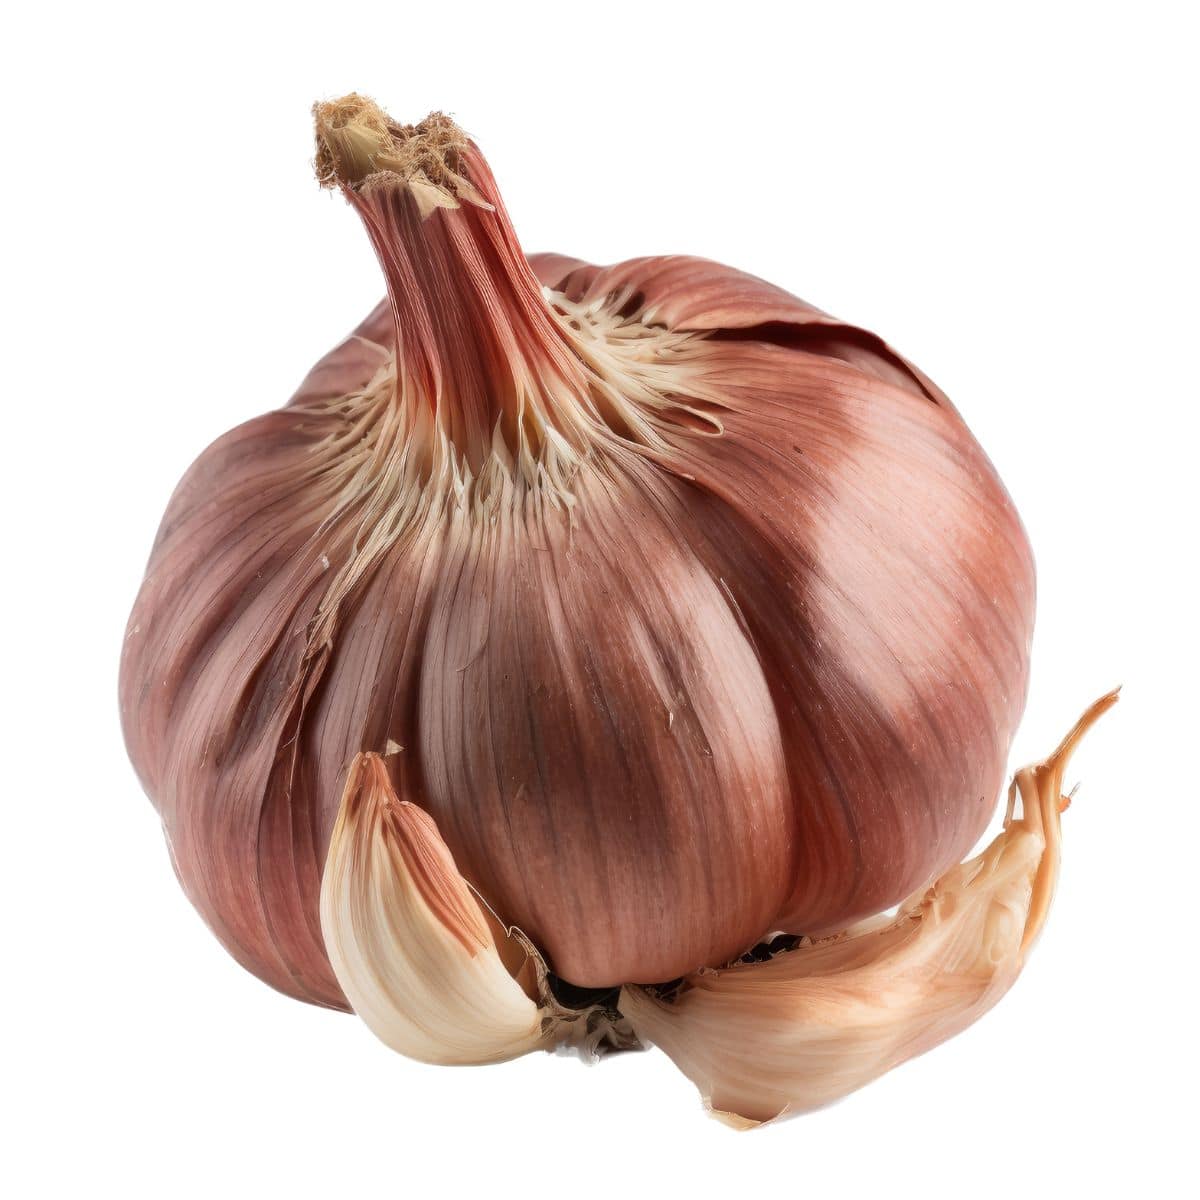 French red garlic on an isolated white background.